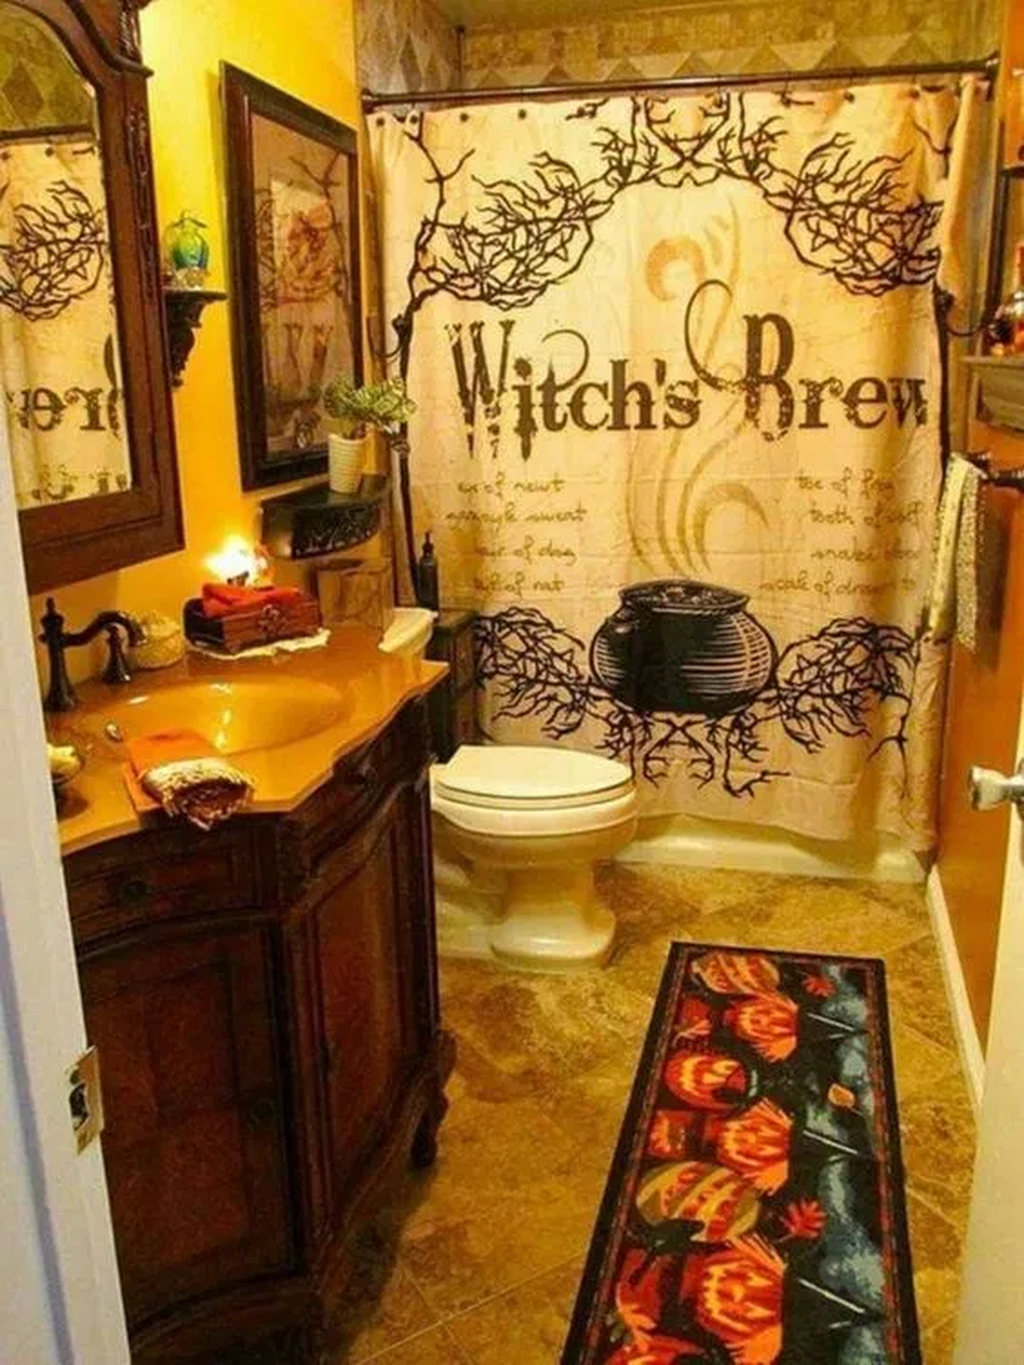 Spook Up Your Bathroom with These Halloween Decorations!